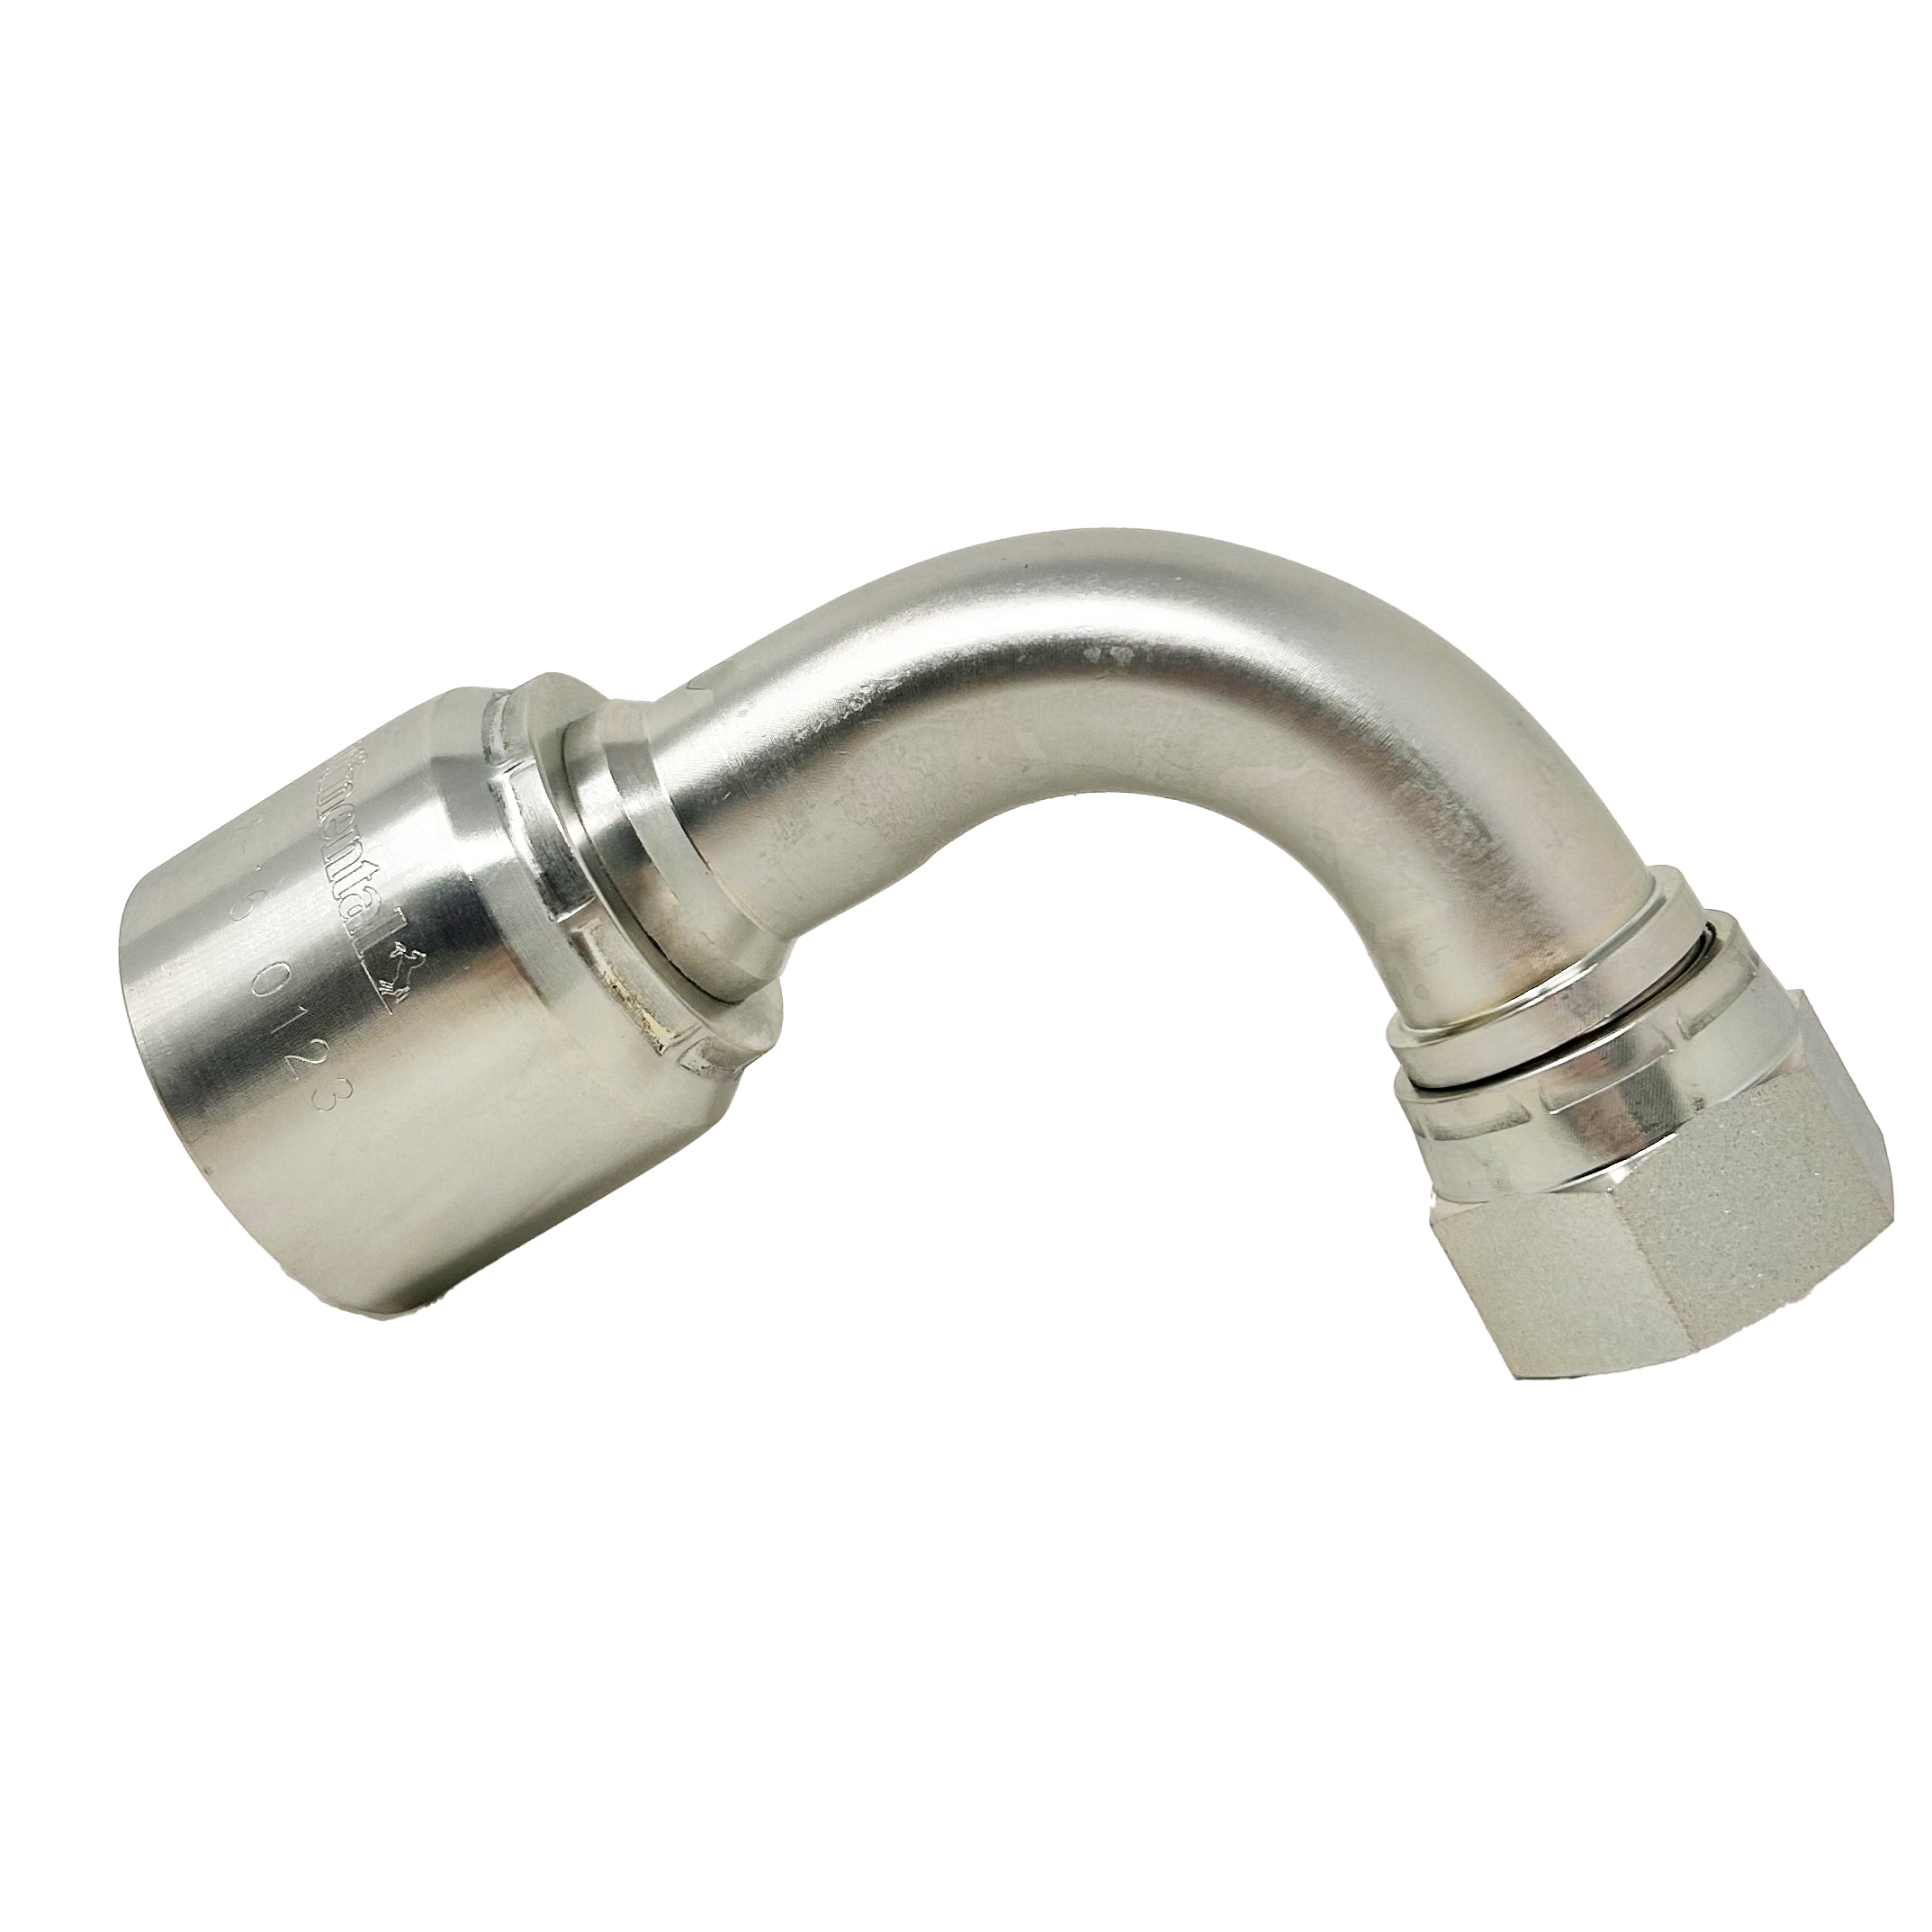 B2-JCFX90-0406: Continental Hose Fitting, 0.25 (1/4") Hose ID x 9/16-18 Female JIC, 90-Degree Swivel Connection